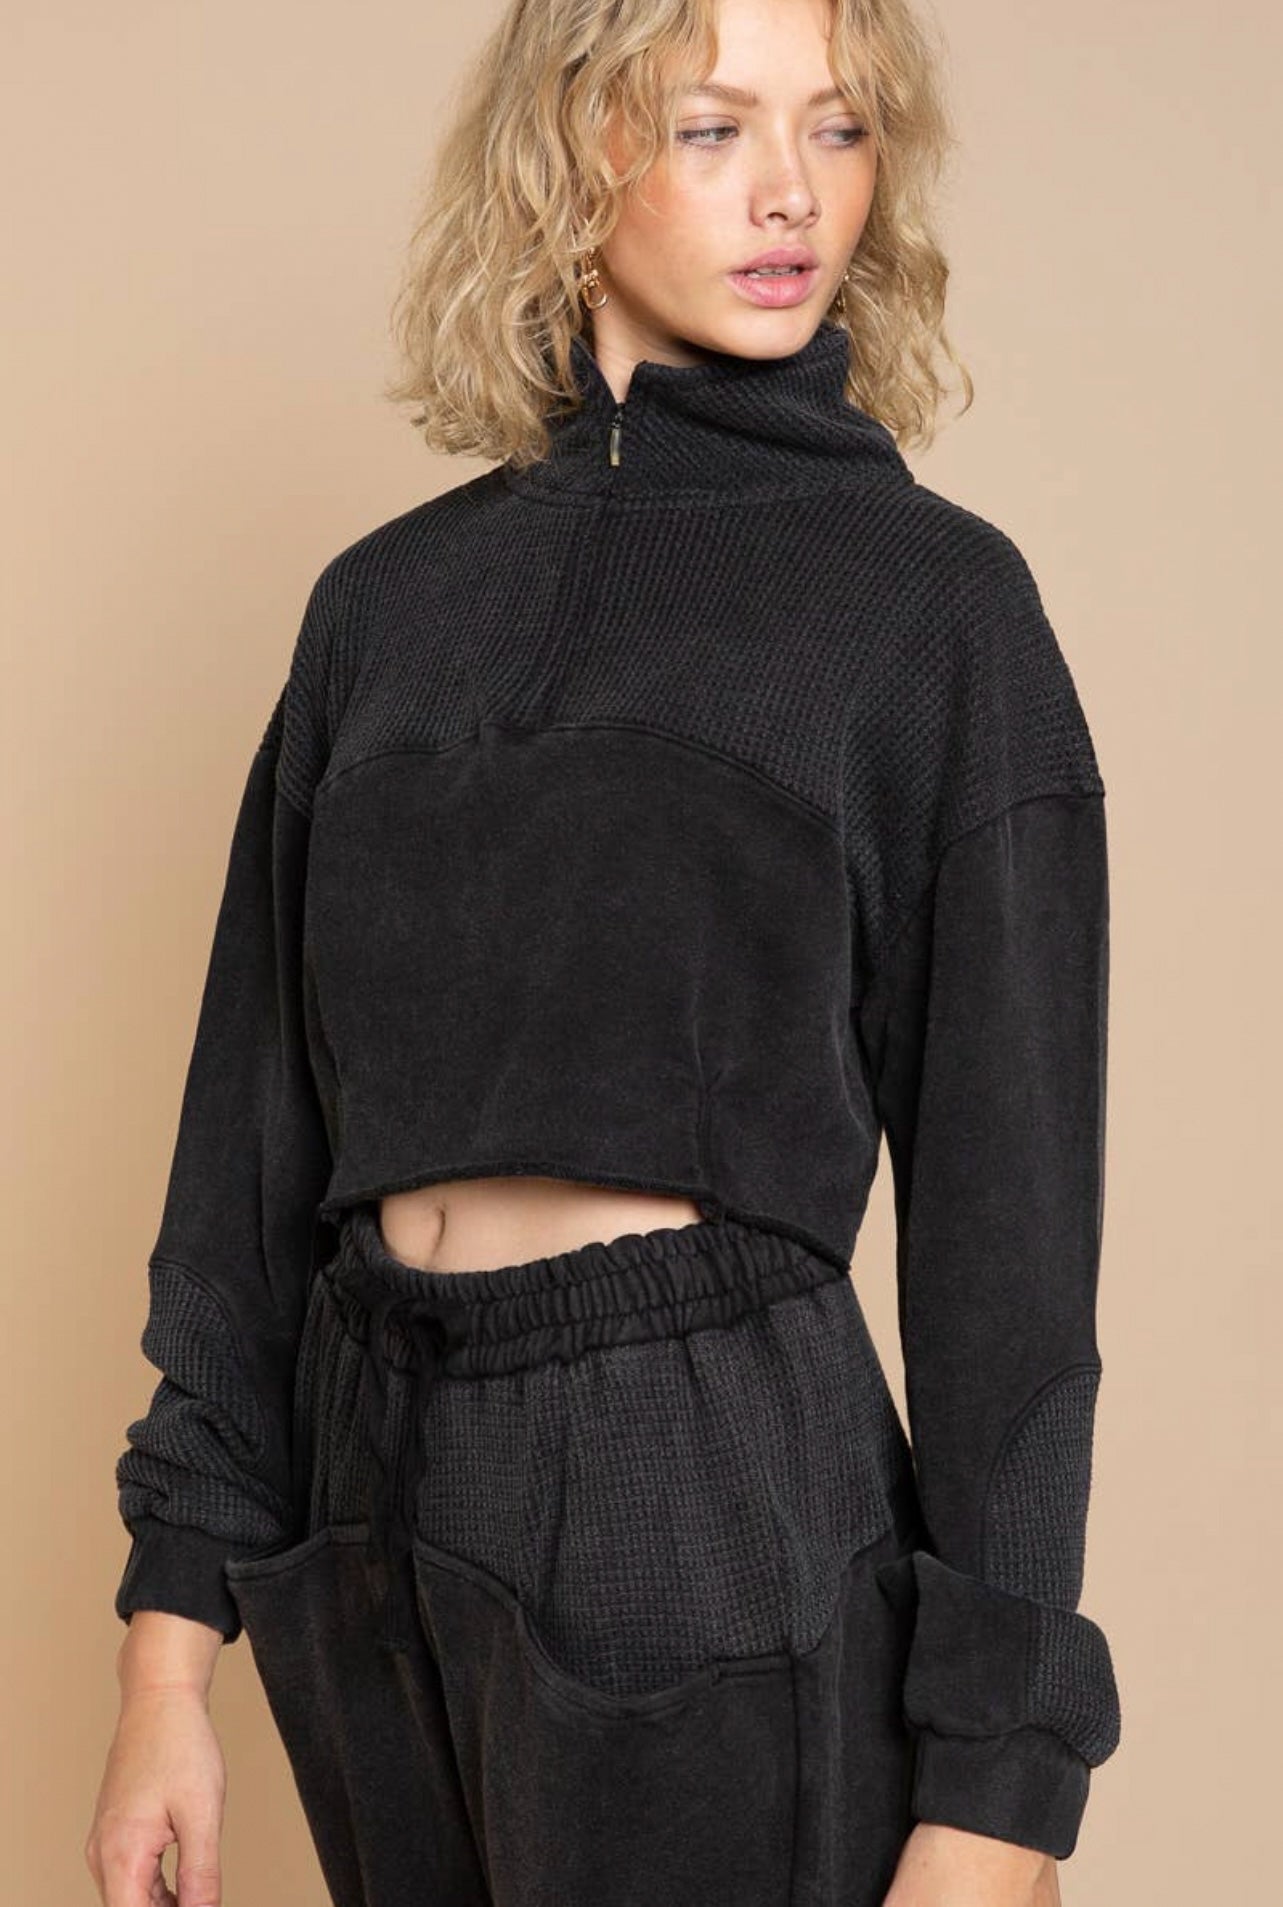 Maeve Half Zip Cropped Micro Waffle Knit French Terry Pullover - Yoga Bitch